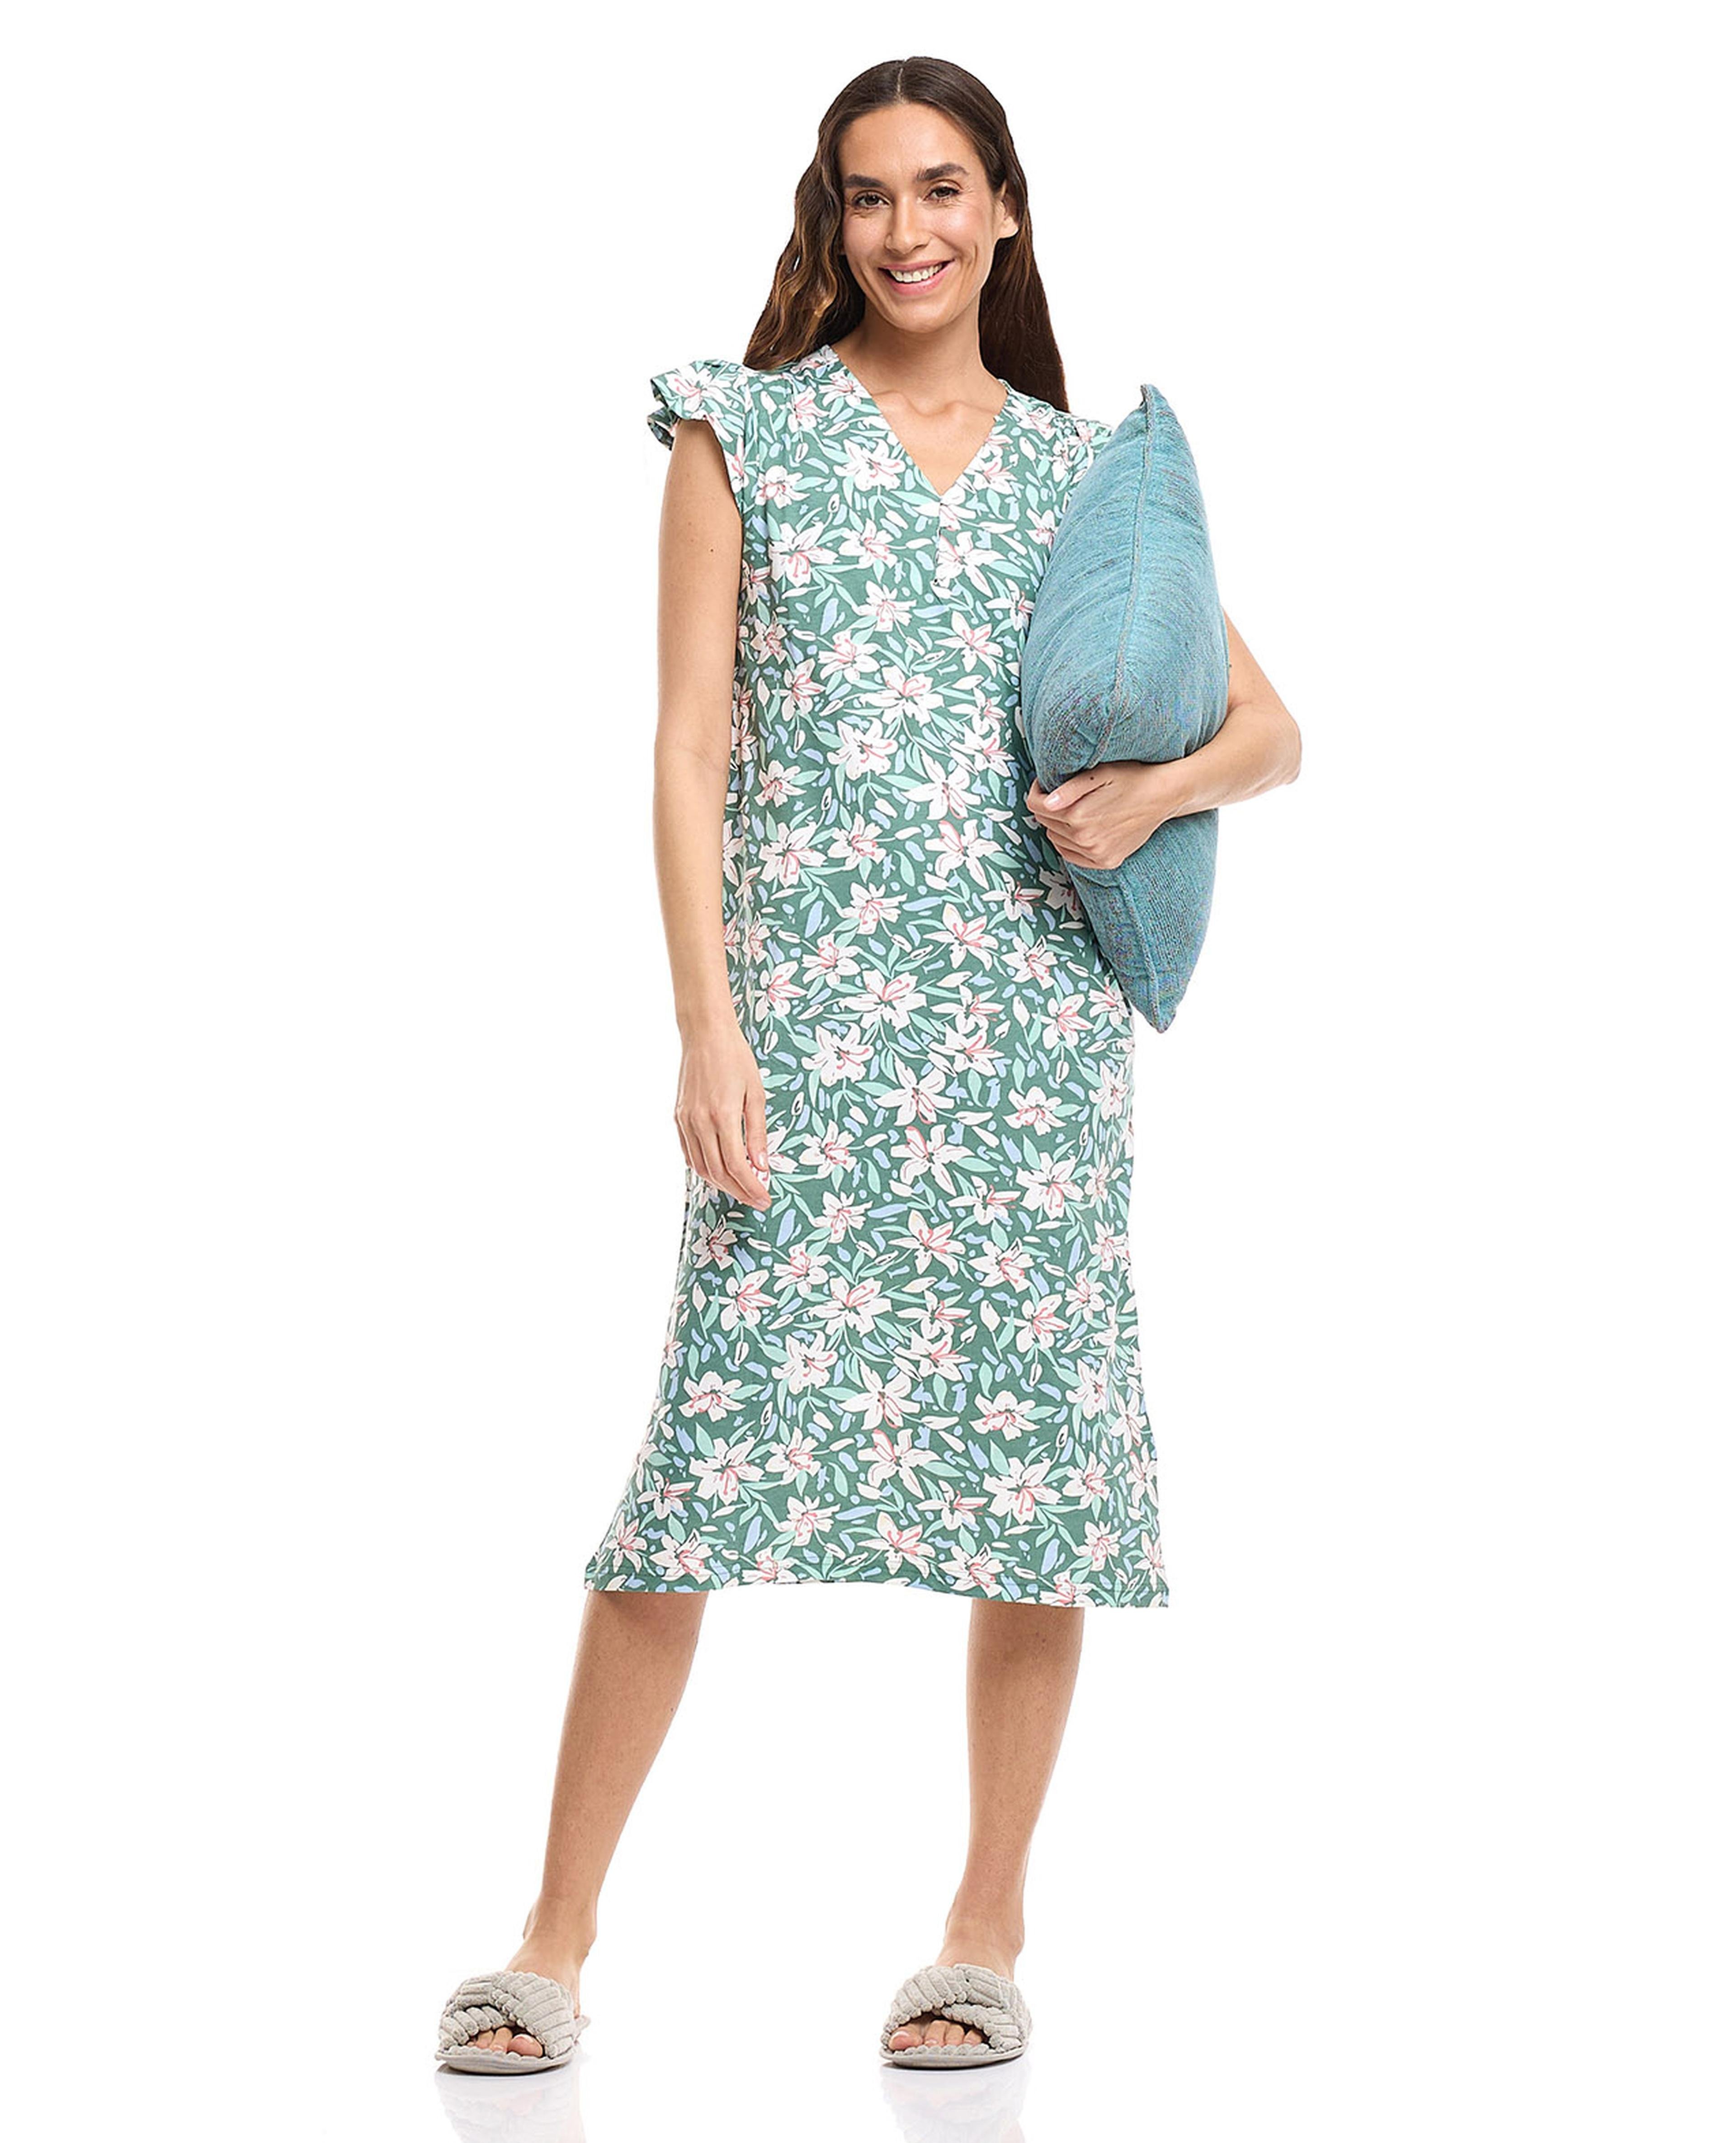 Printed Nightdress with V-Neck and Short Sleeves